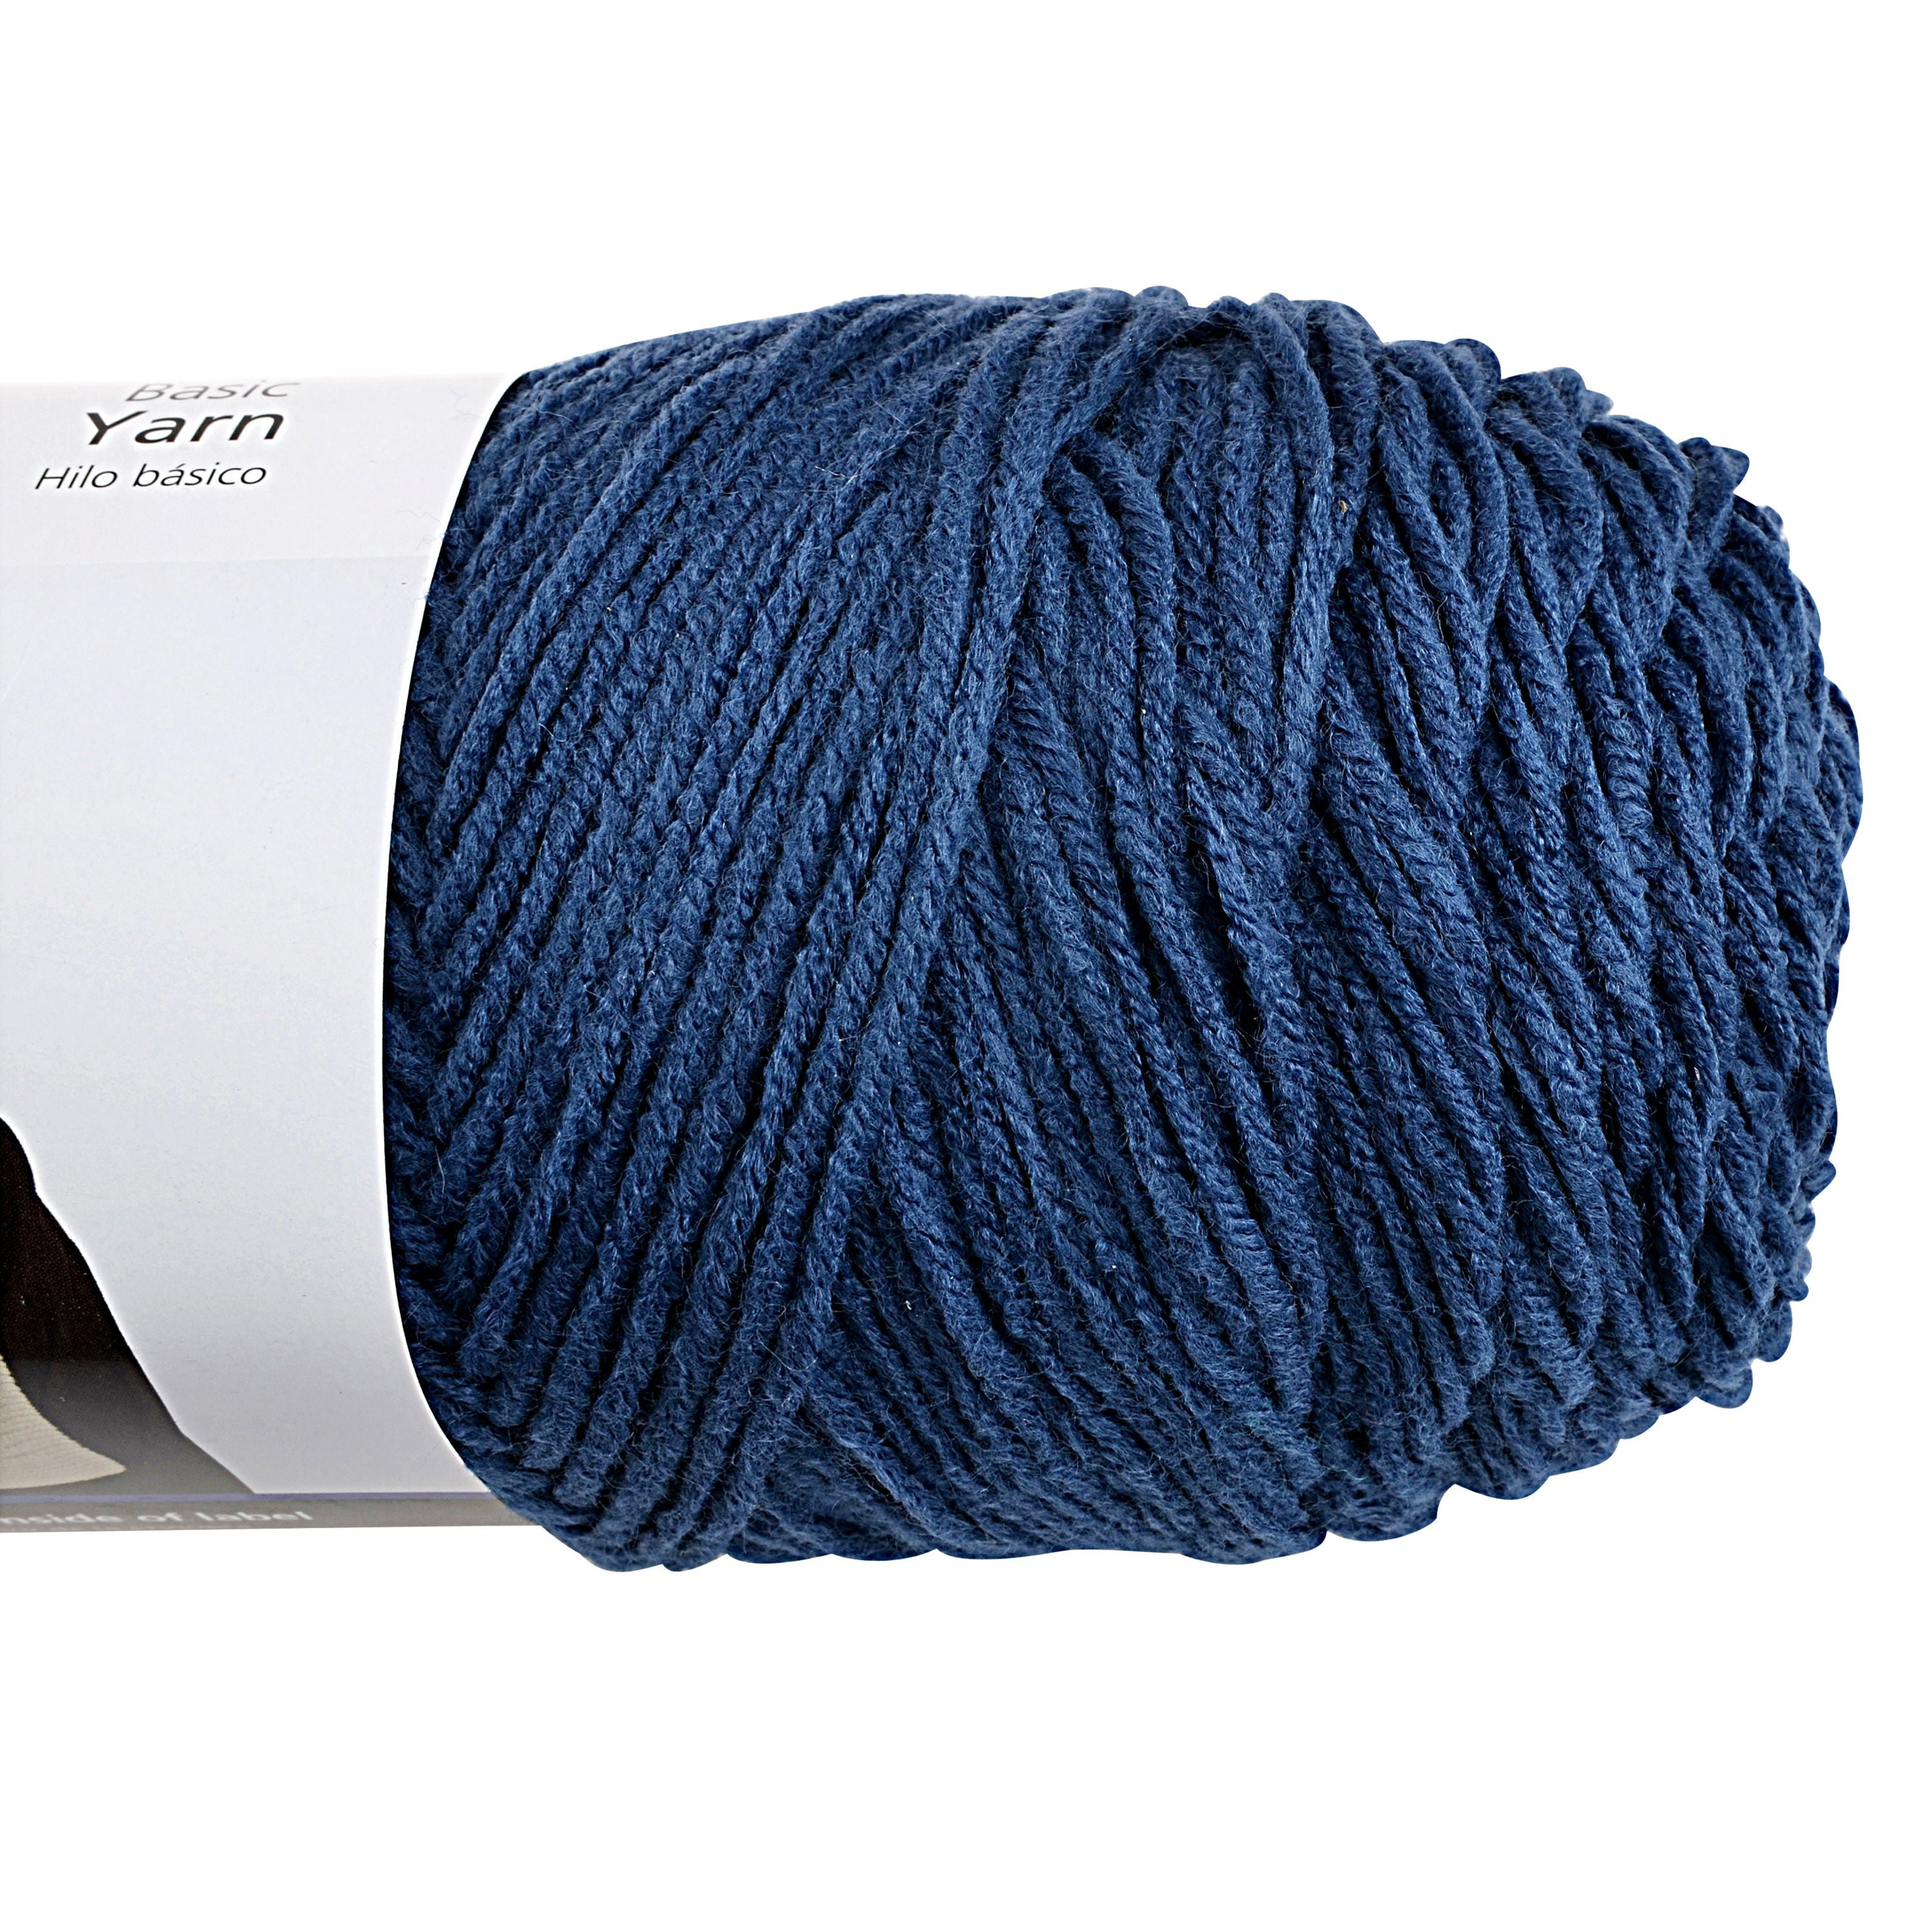 Naztazia - Have you seen or tried the new Mainstays yarn available at  Walmart yet? It's their own brand and it's very soft. And at $1.97 a great  bargain. My local Walmart